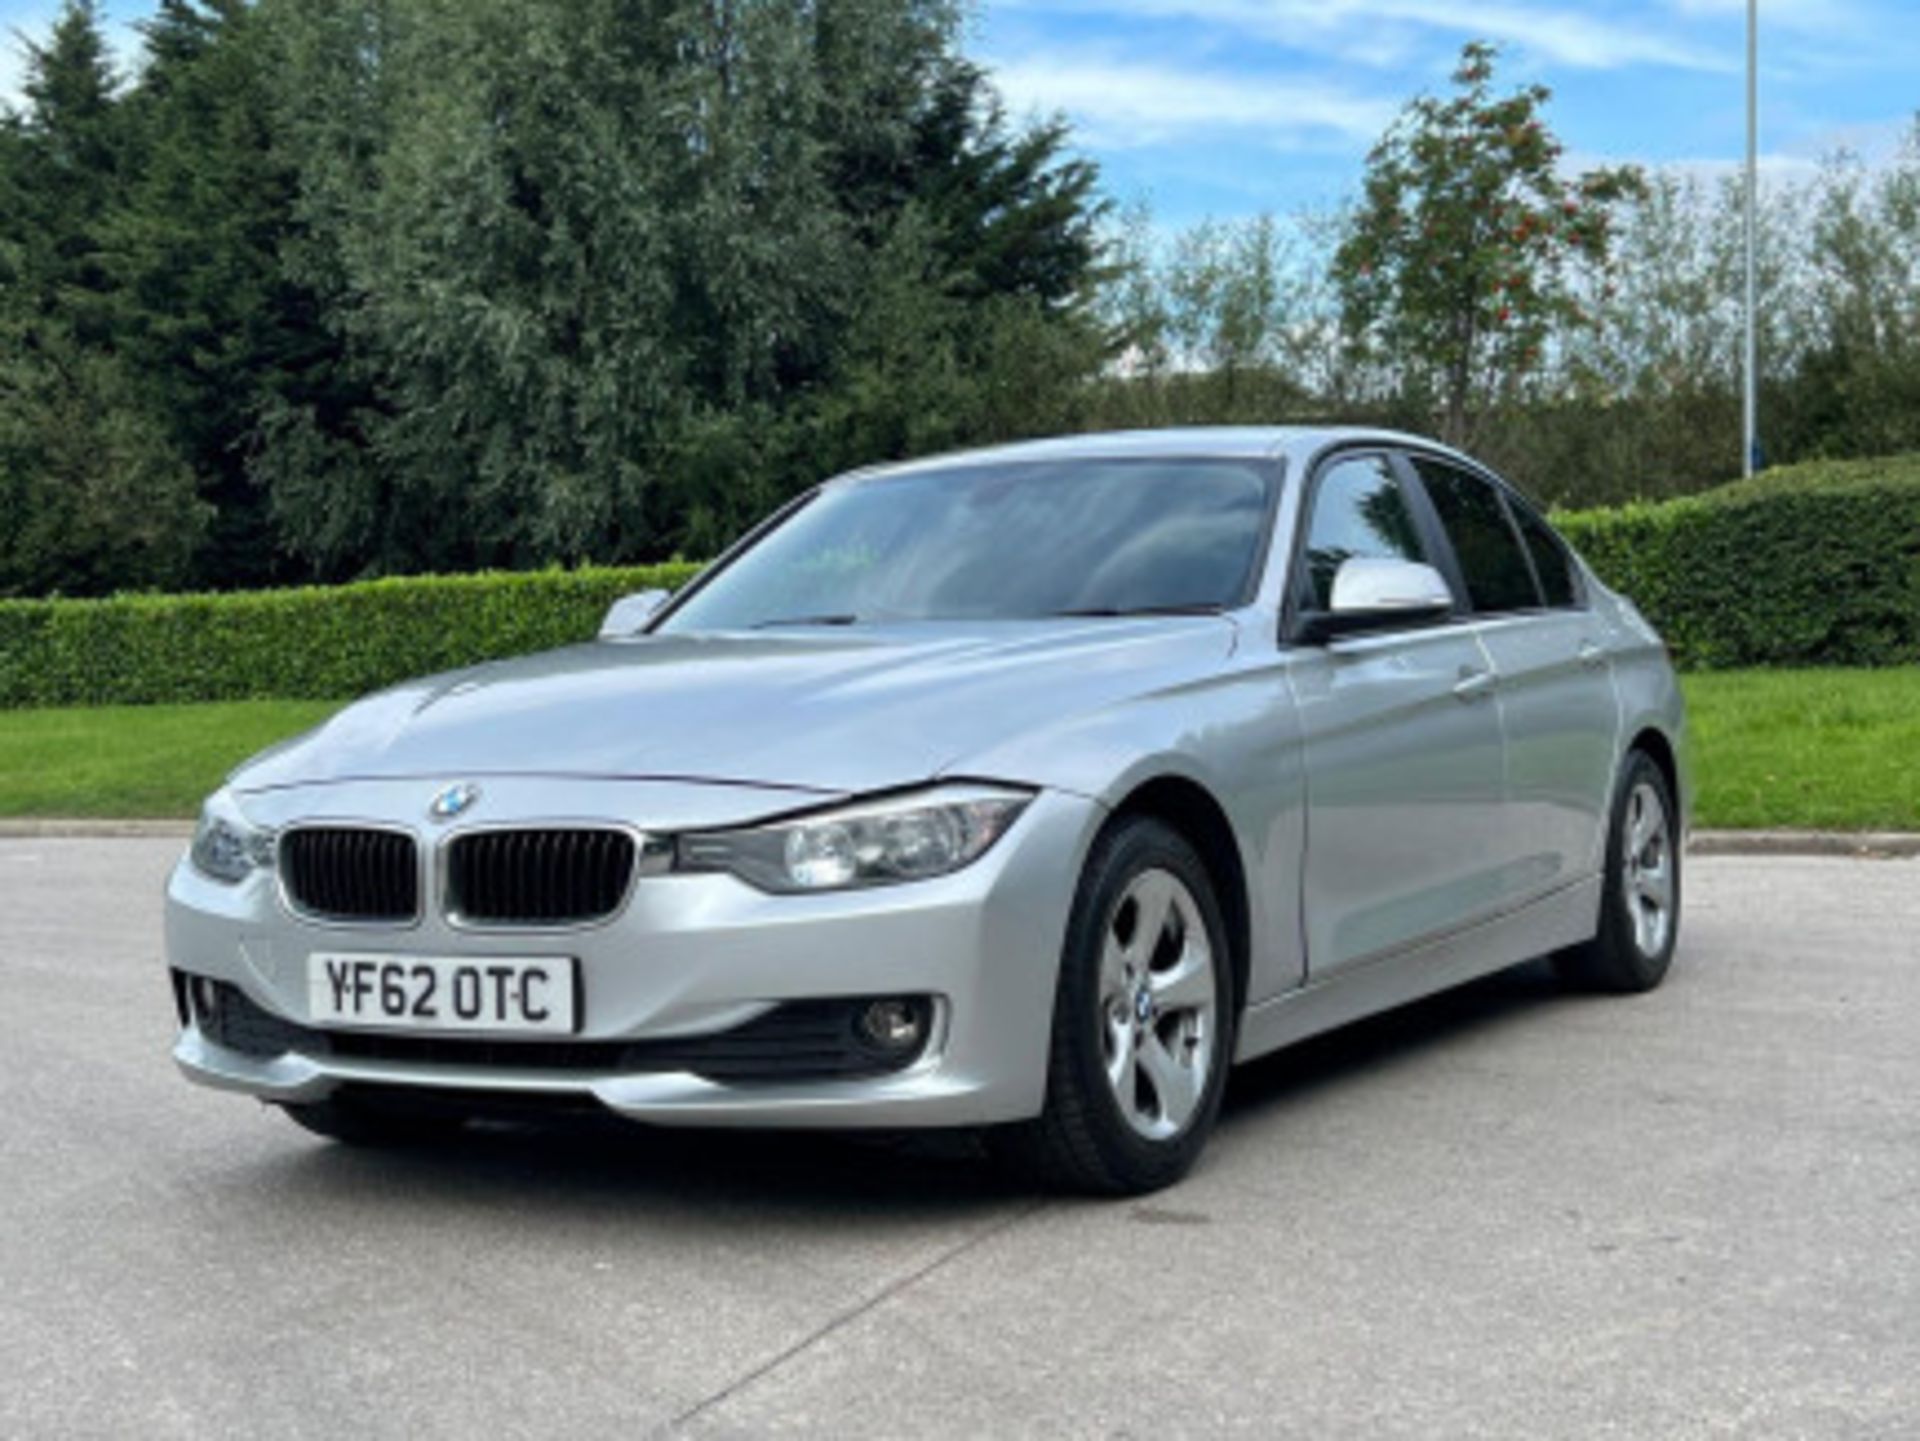 BMW 3 SERIES 2.0 DIESEL ED START STOP - A WELL-MAINTAINED GEM >>--NO VAT ON HAMMER--<< - Image 116 of 229